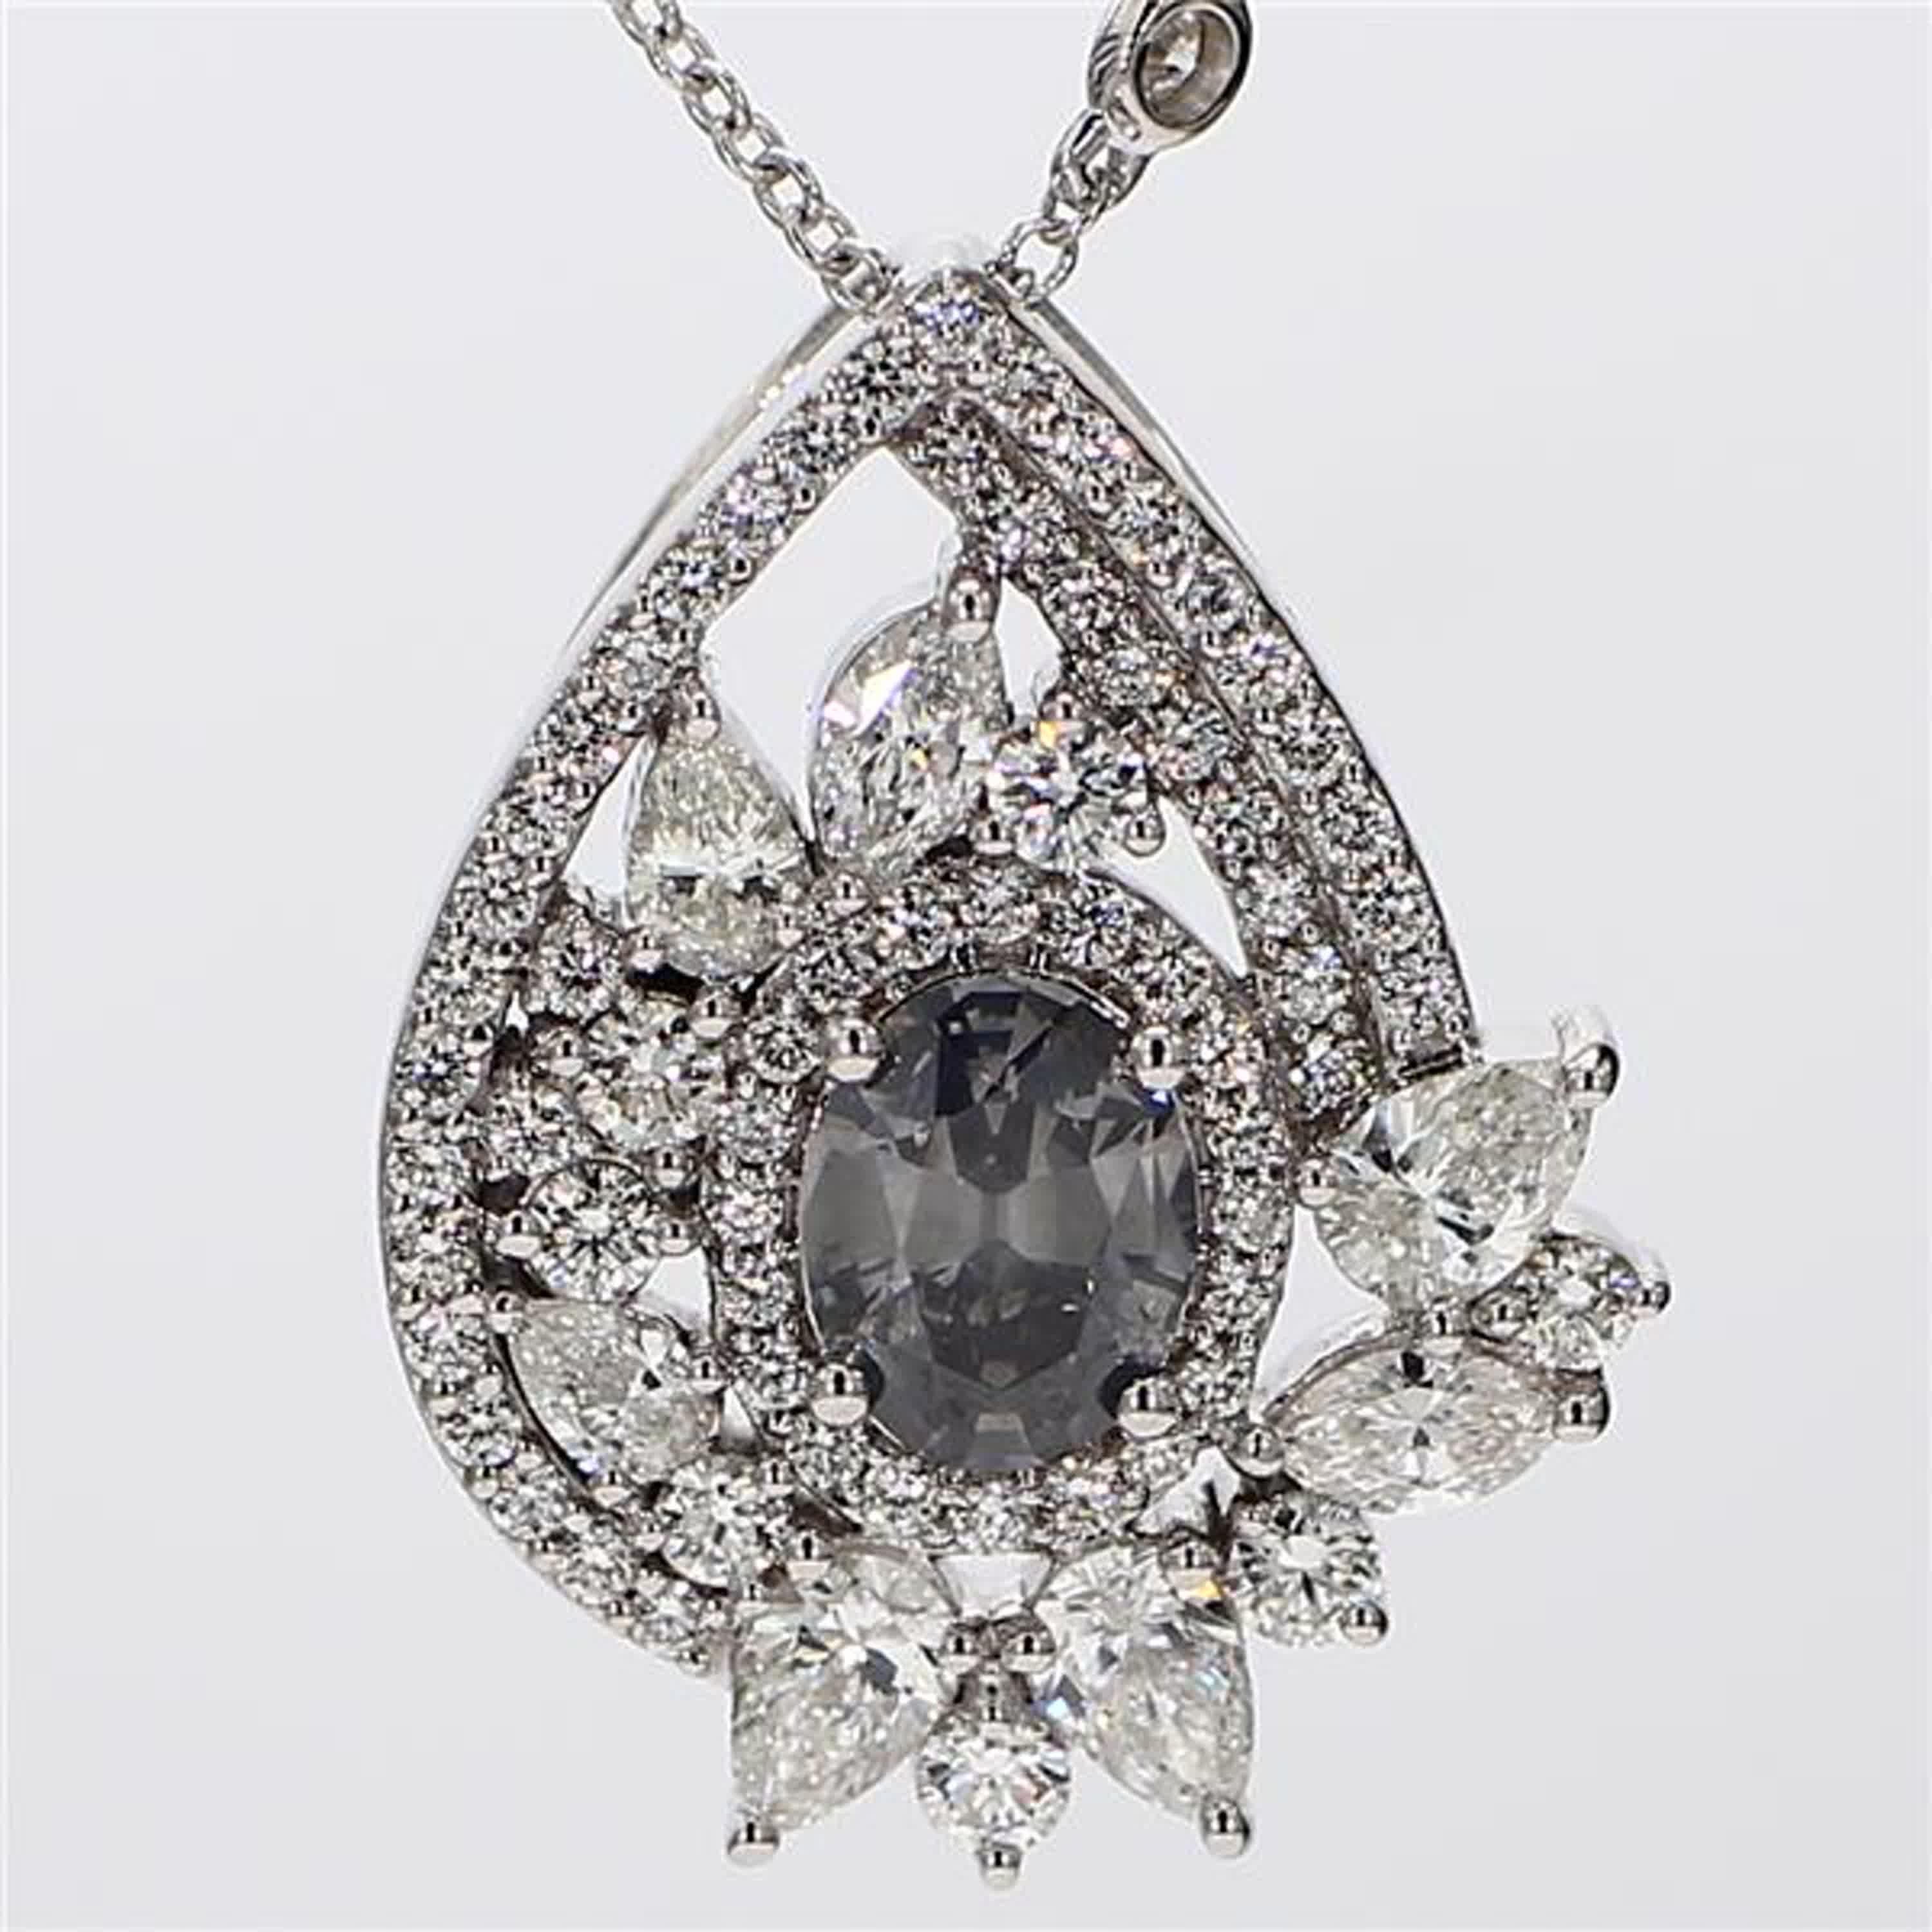 RareGemWorld's classic diamond pendant. Mounted in a beautiful 18K White Gold setting with a natural oval cut gray diamond. The yellow diamond is surrounded by natural pear cut white diamonds, natural marquise cut white diamonds, and natural round